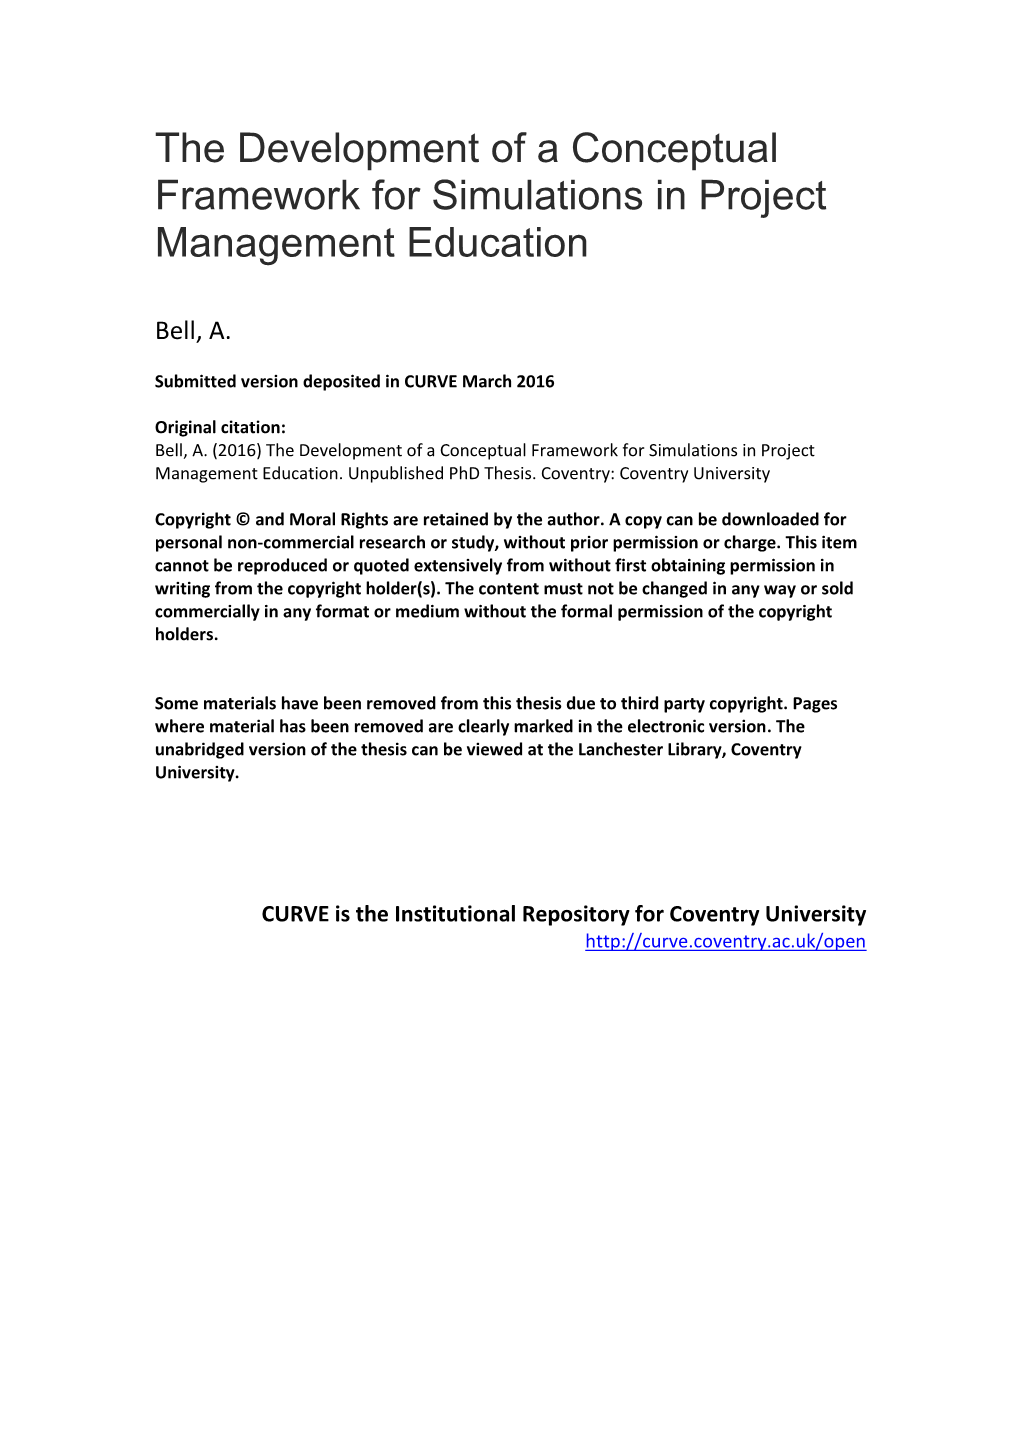 The Development of a Conceptual Framework for Simulations in Project Management Education